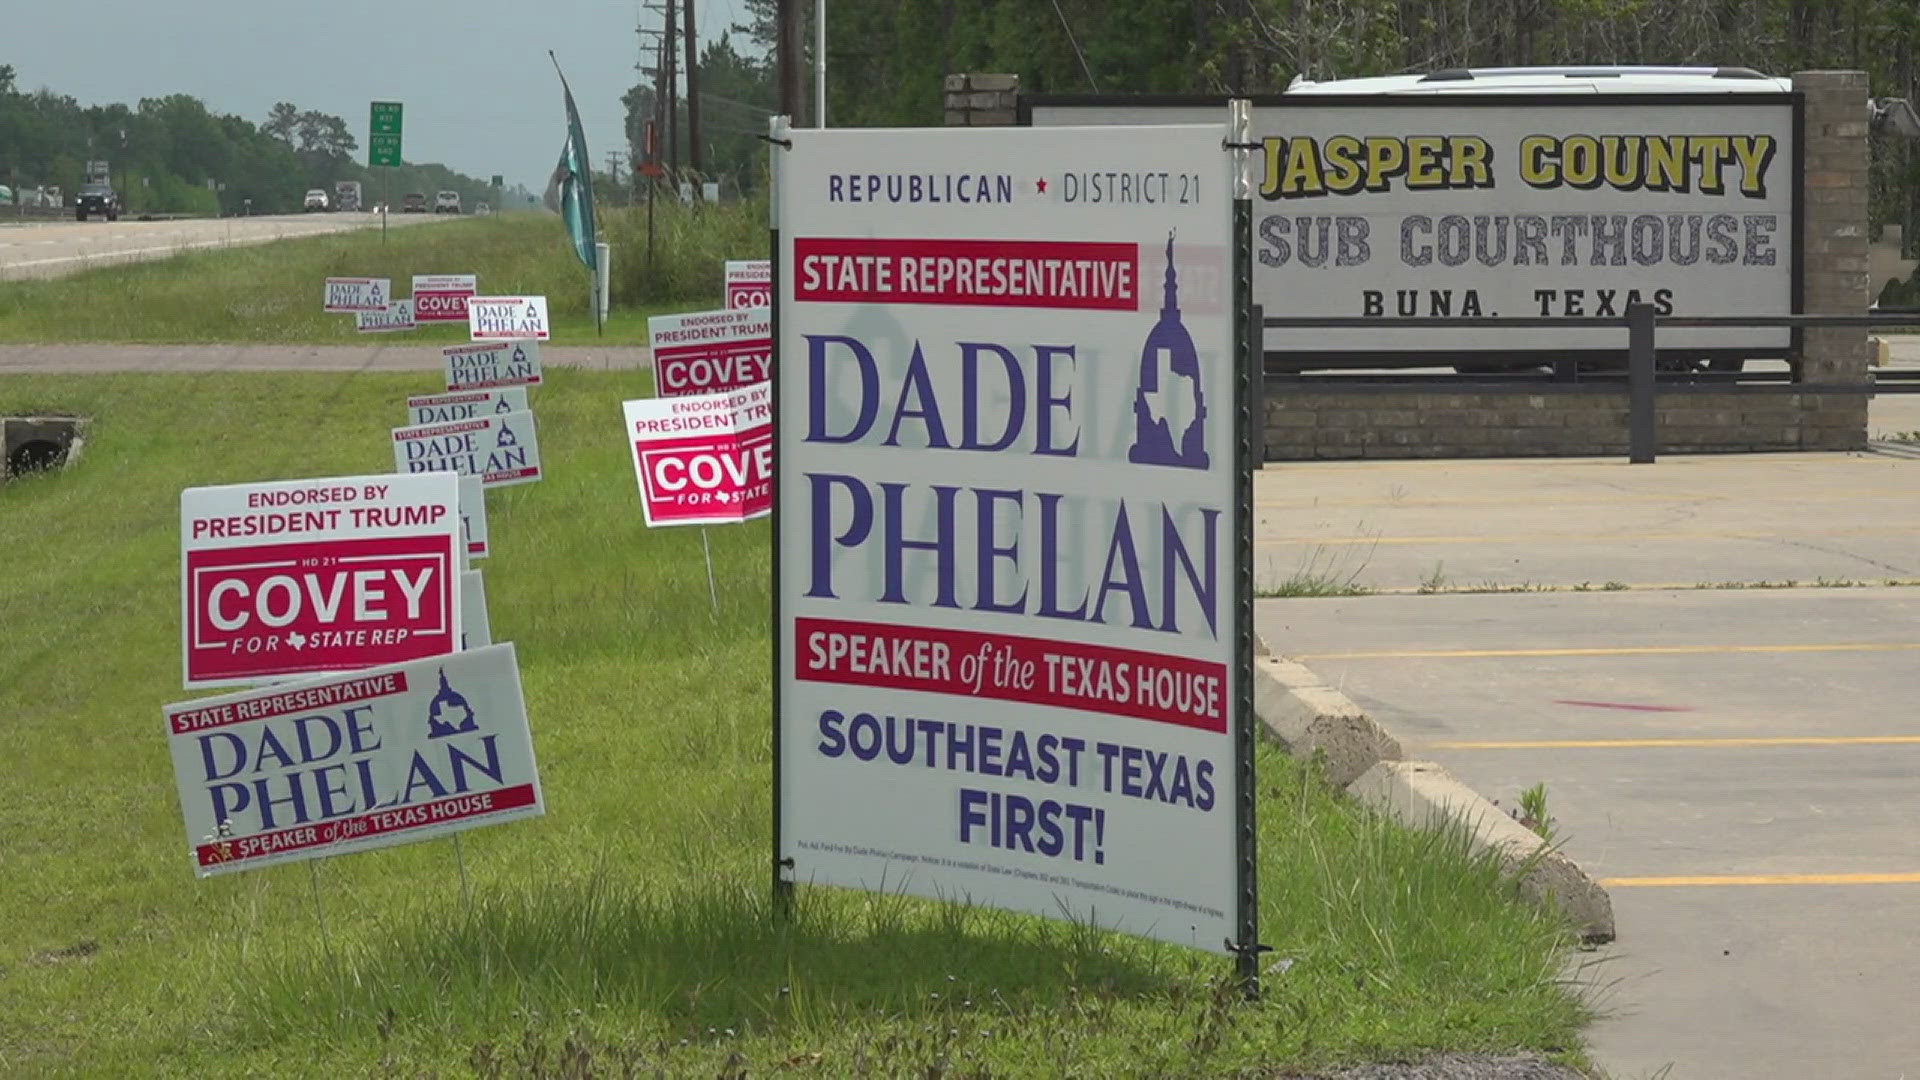 Speaker Dade Phelan faces a challenge from David Covey for the Texas House Representative District 21.